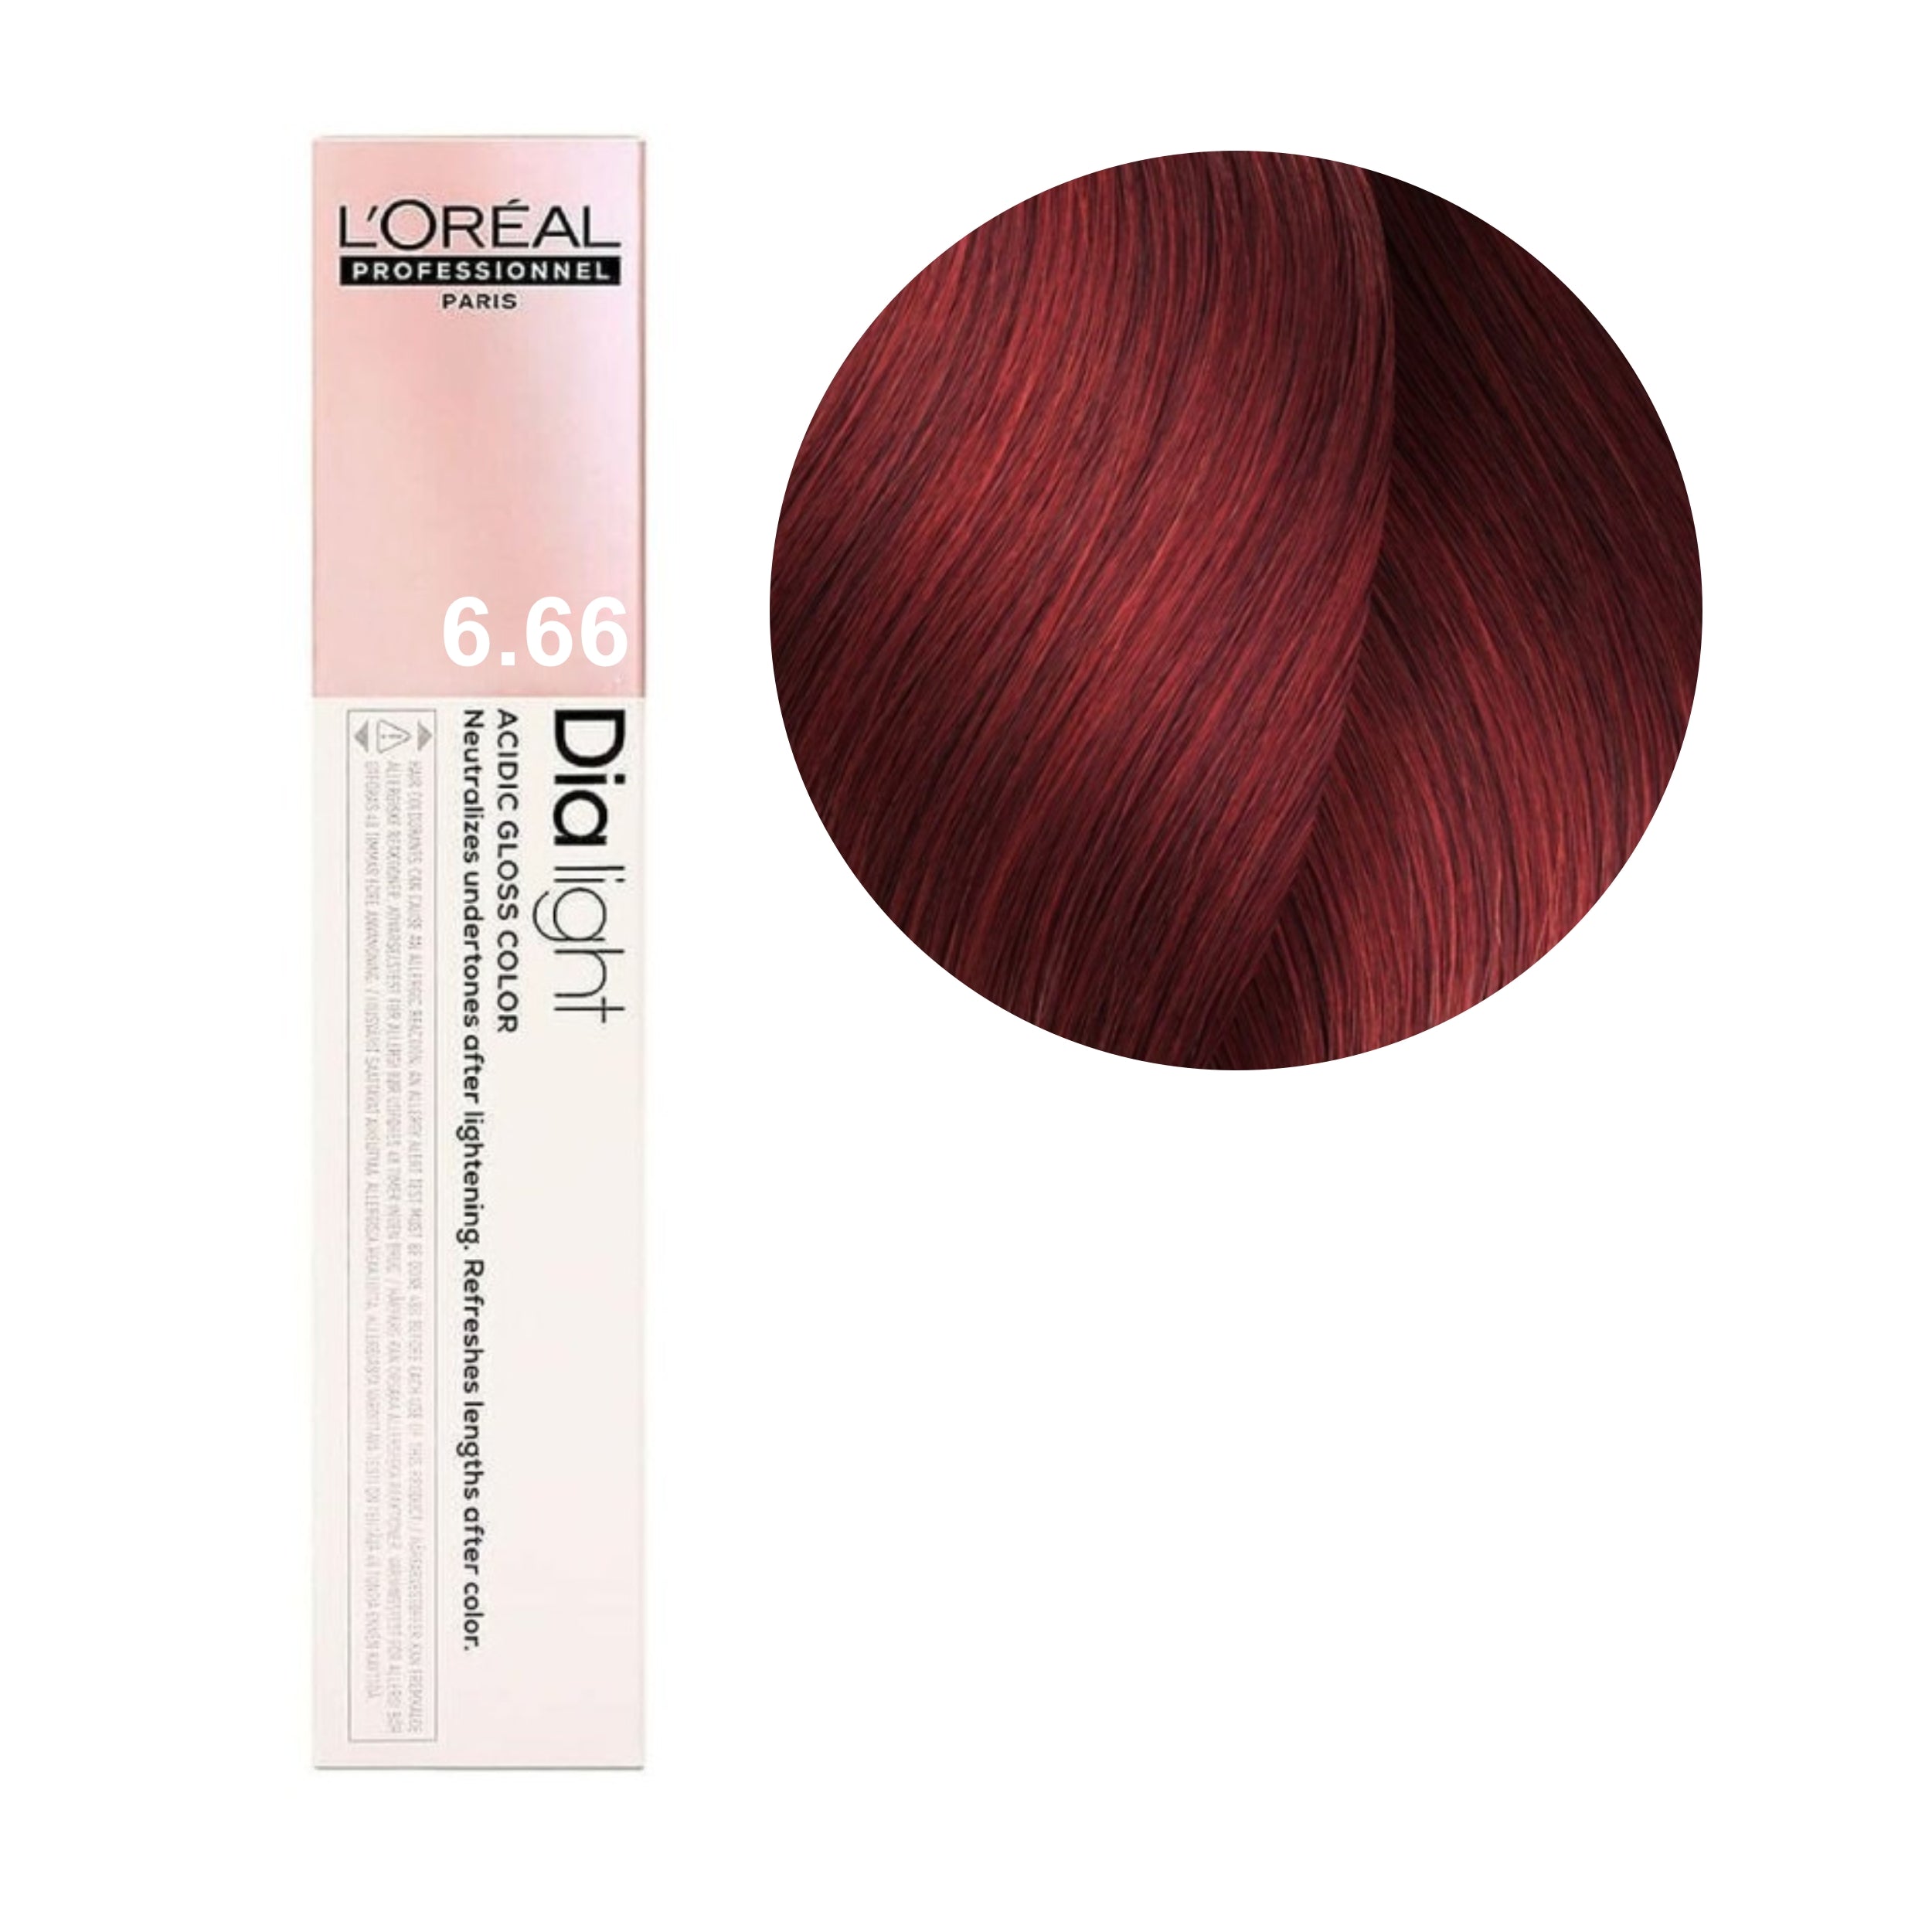 a tube of red hair color on a white background